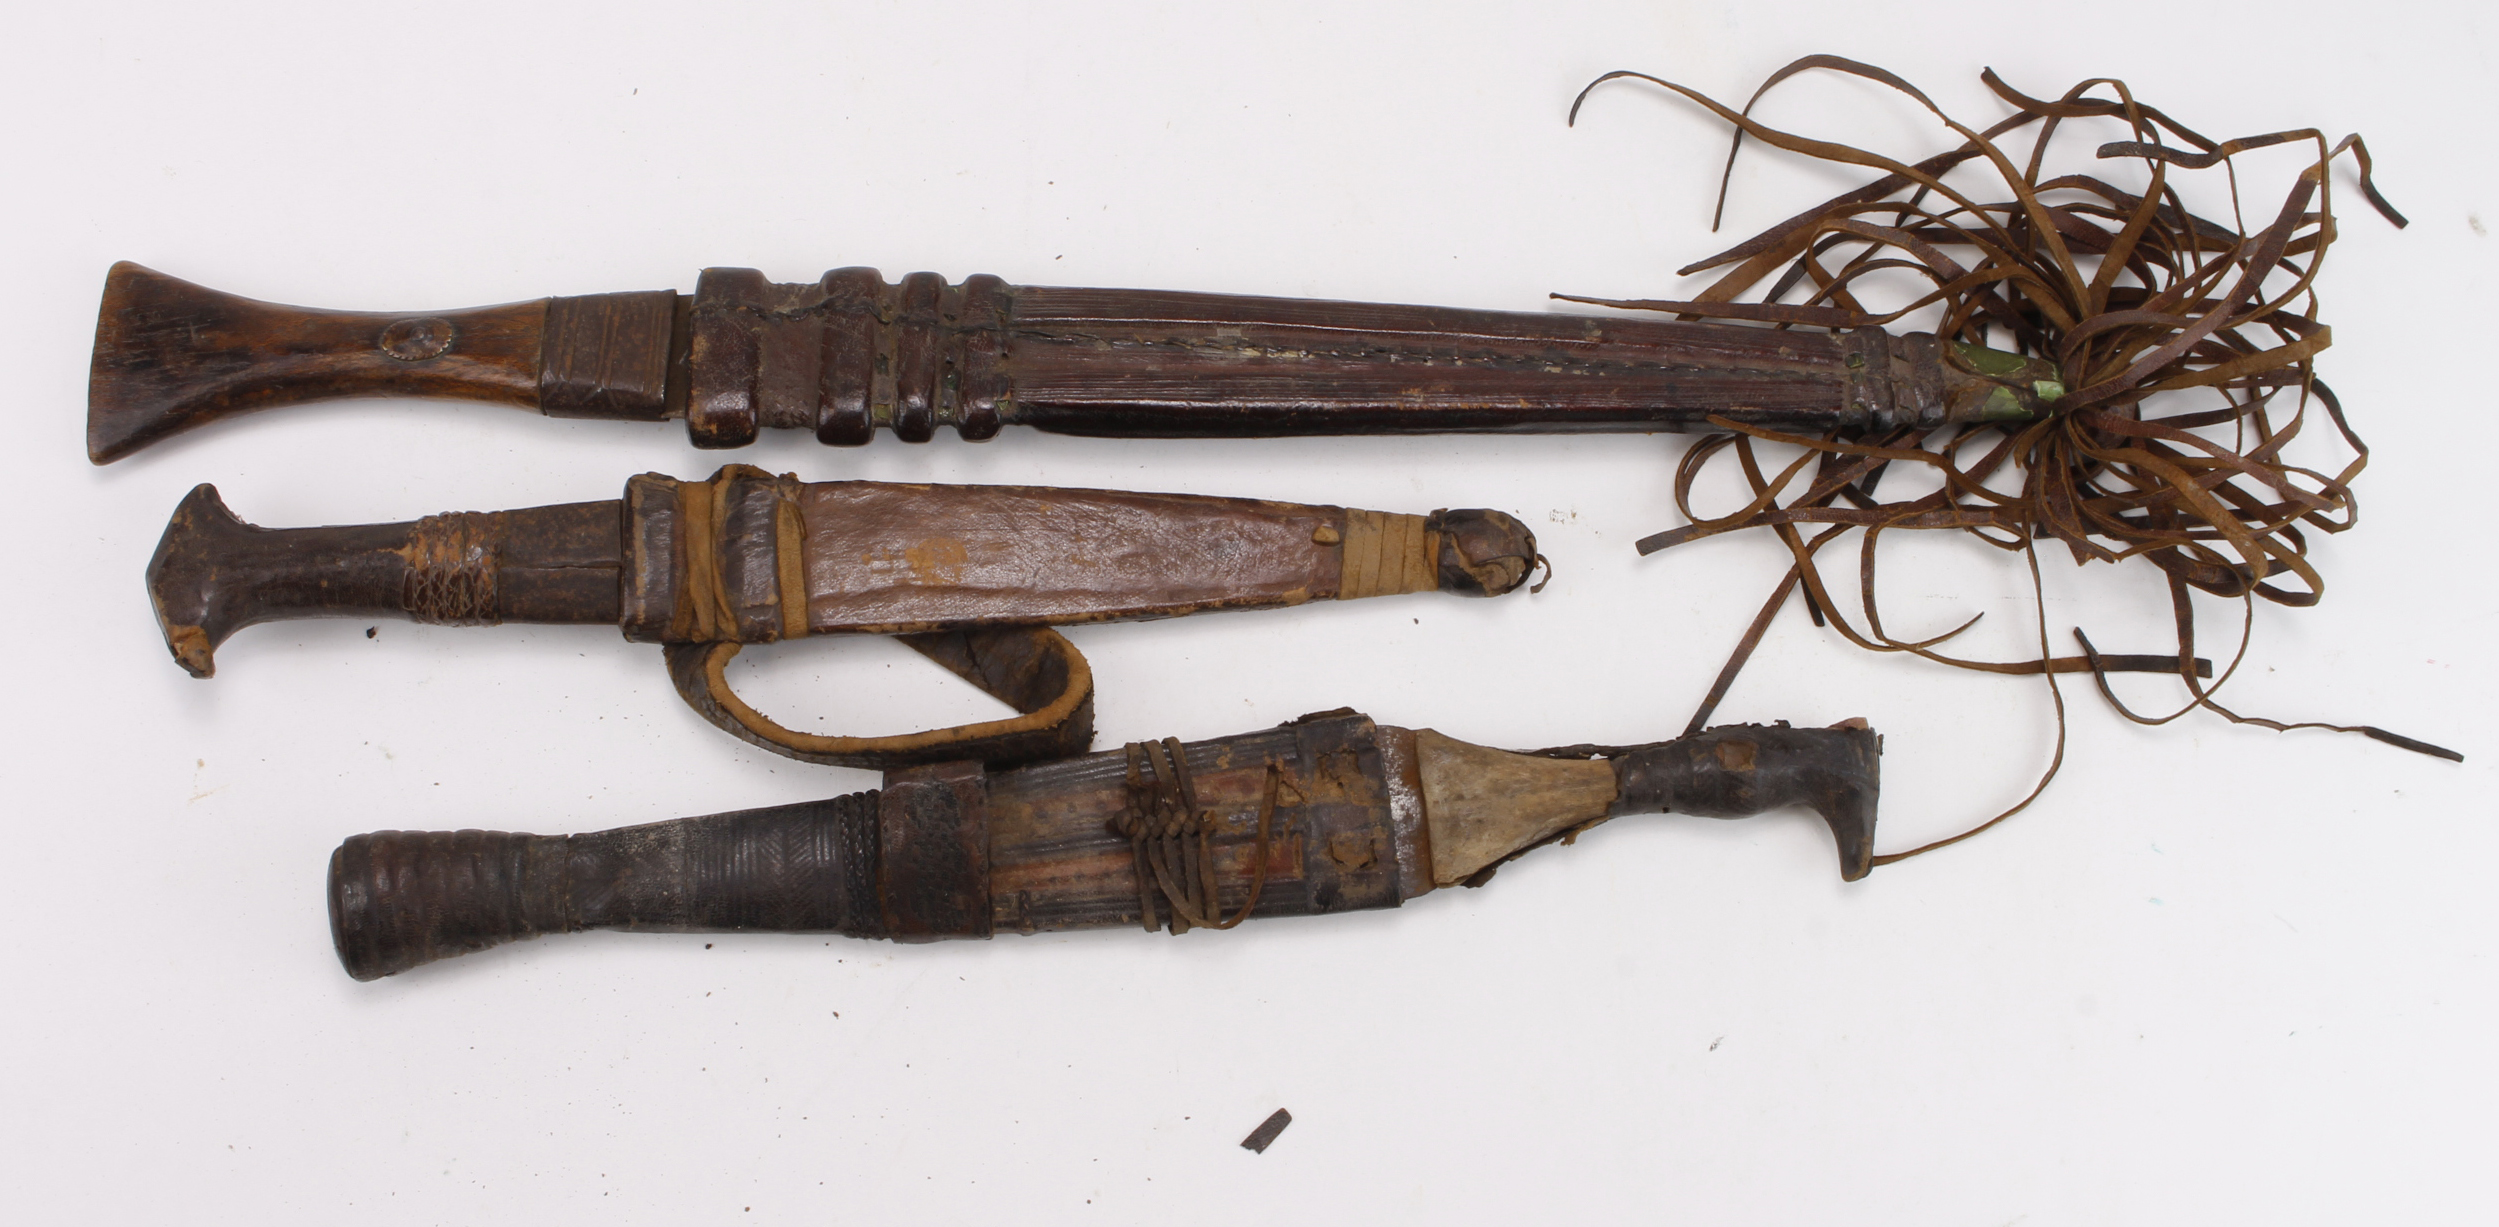 African Tribal knives, leaf shaped blades, leather scabbards, surface rust to blades. Nice lot worth